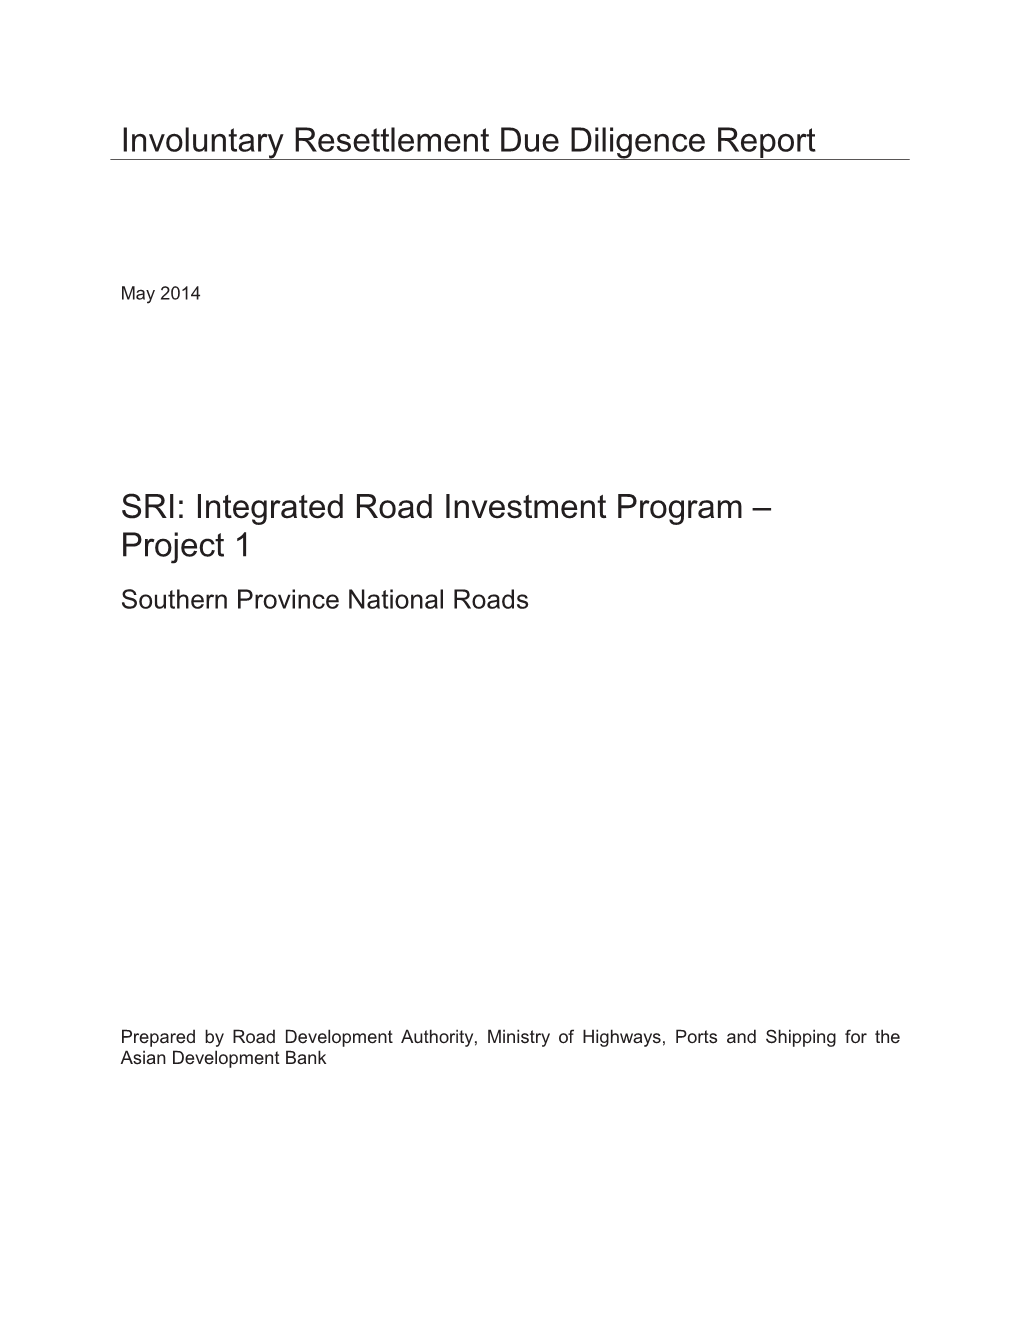 47273-003: Resettlement Due Diligence Report for Southern